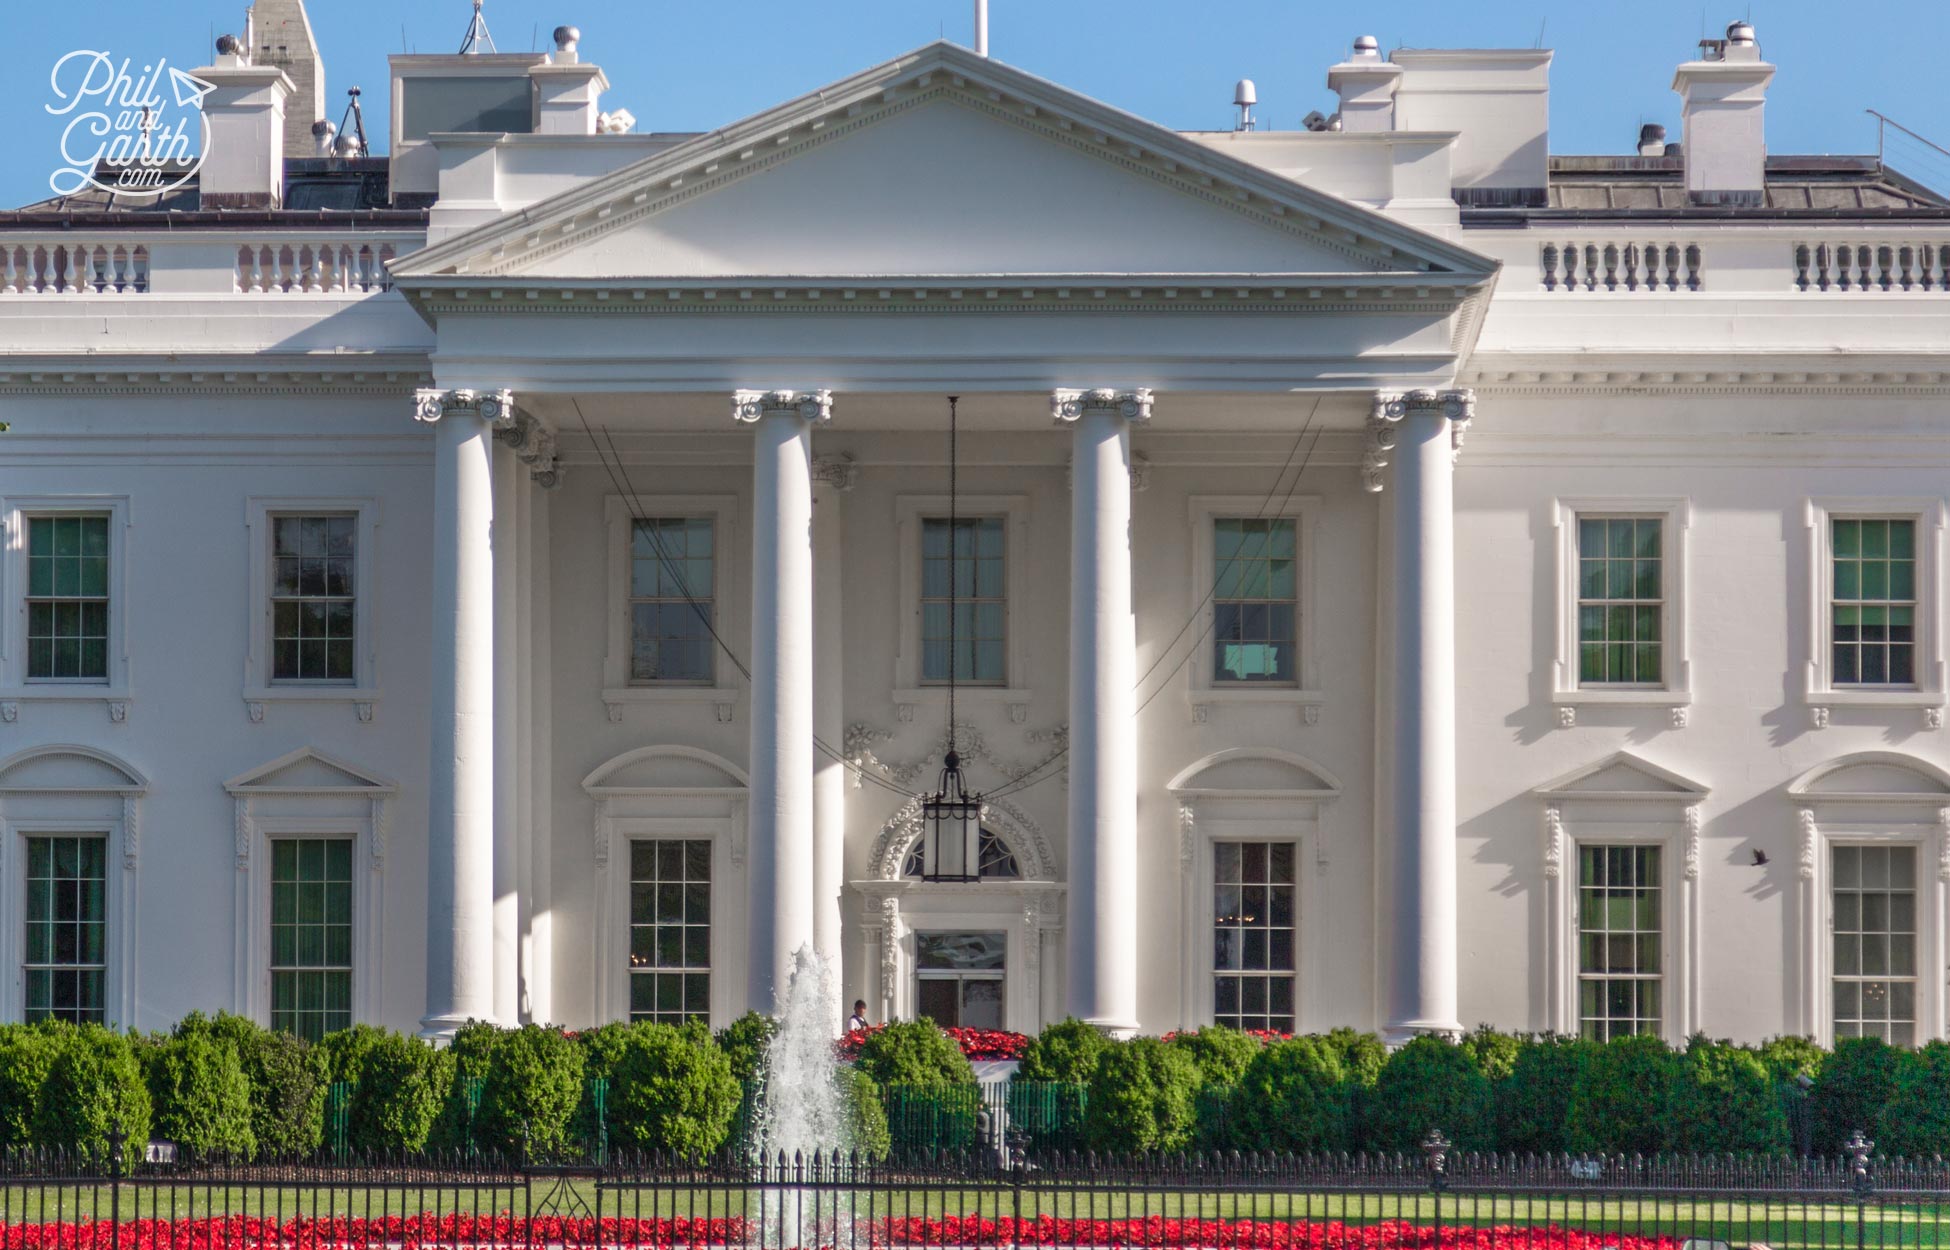 The White House has 132 rooms, 35 bathrooms, and 6 levels in parts